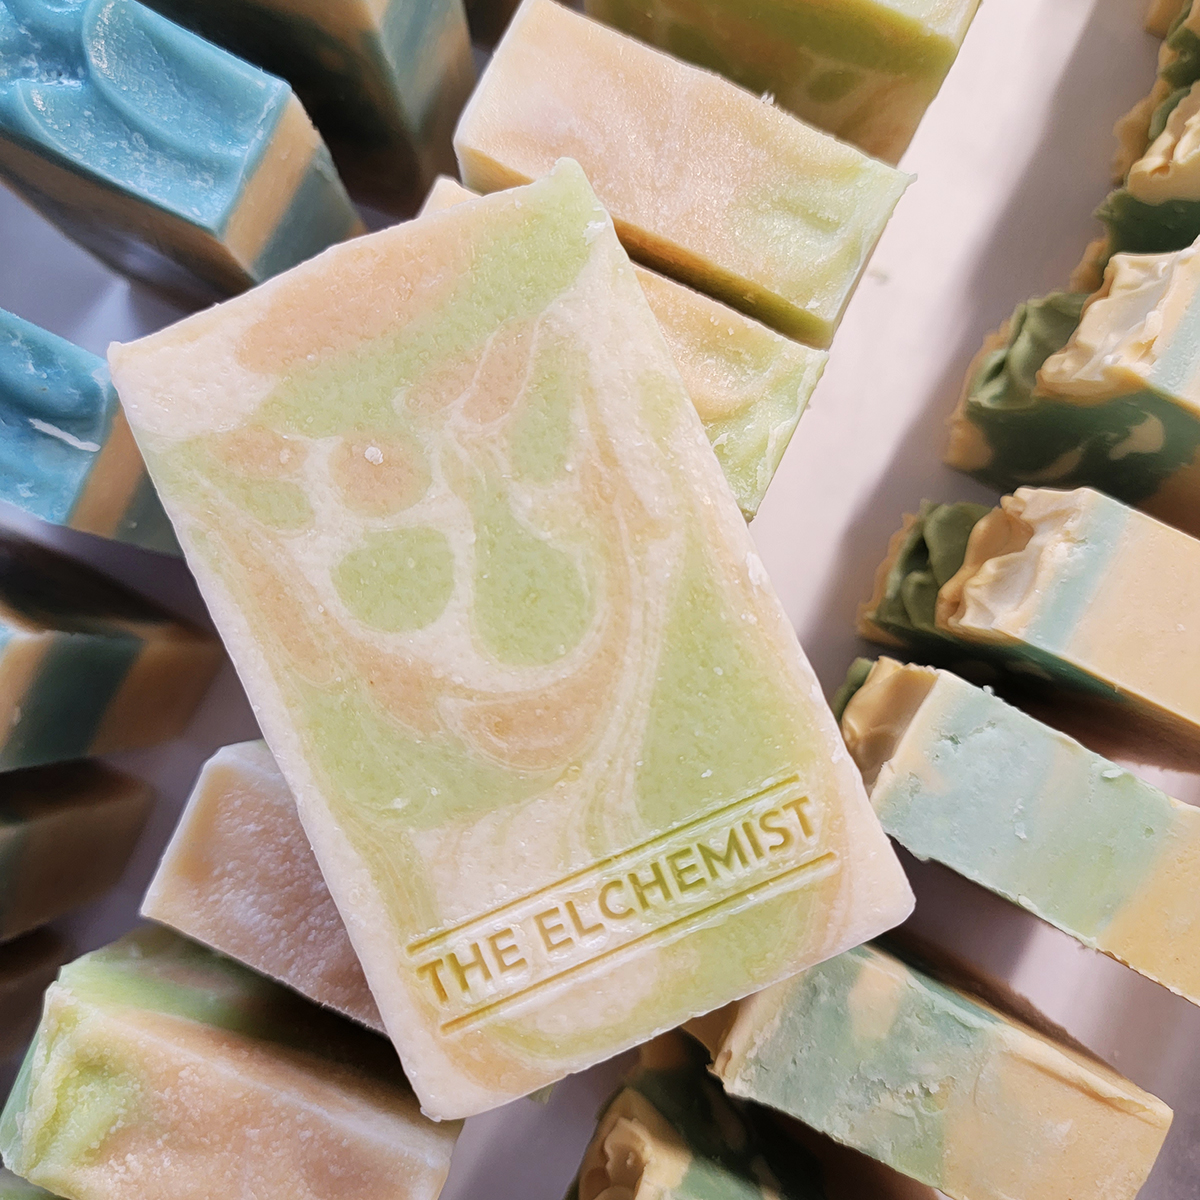 The Elcemist - Gilded Pear Soap sitting on rows of soaps